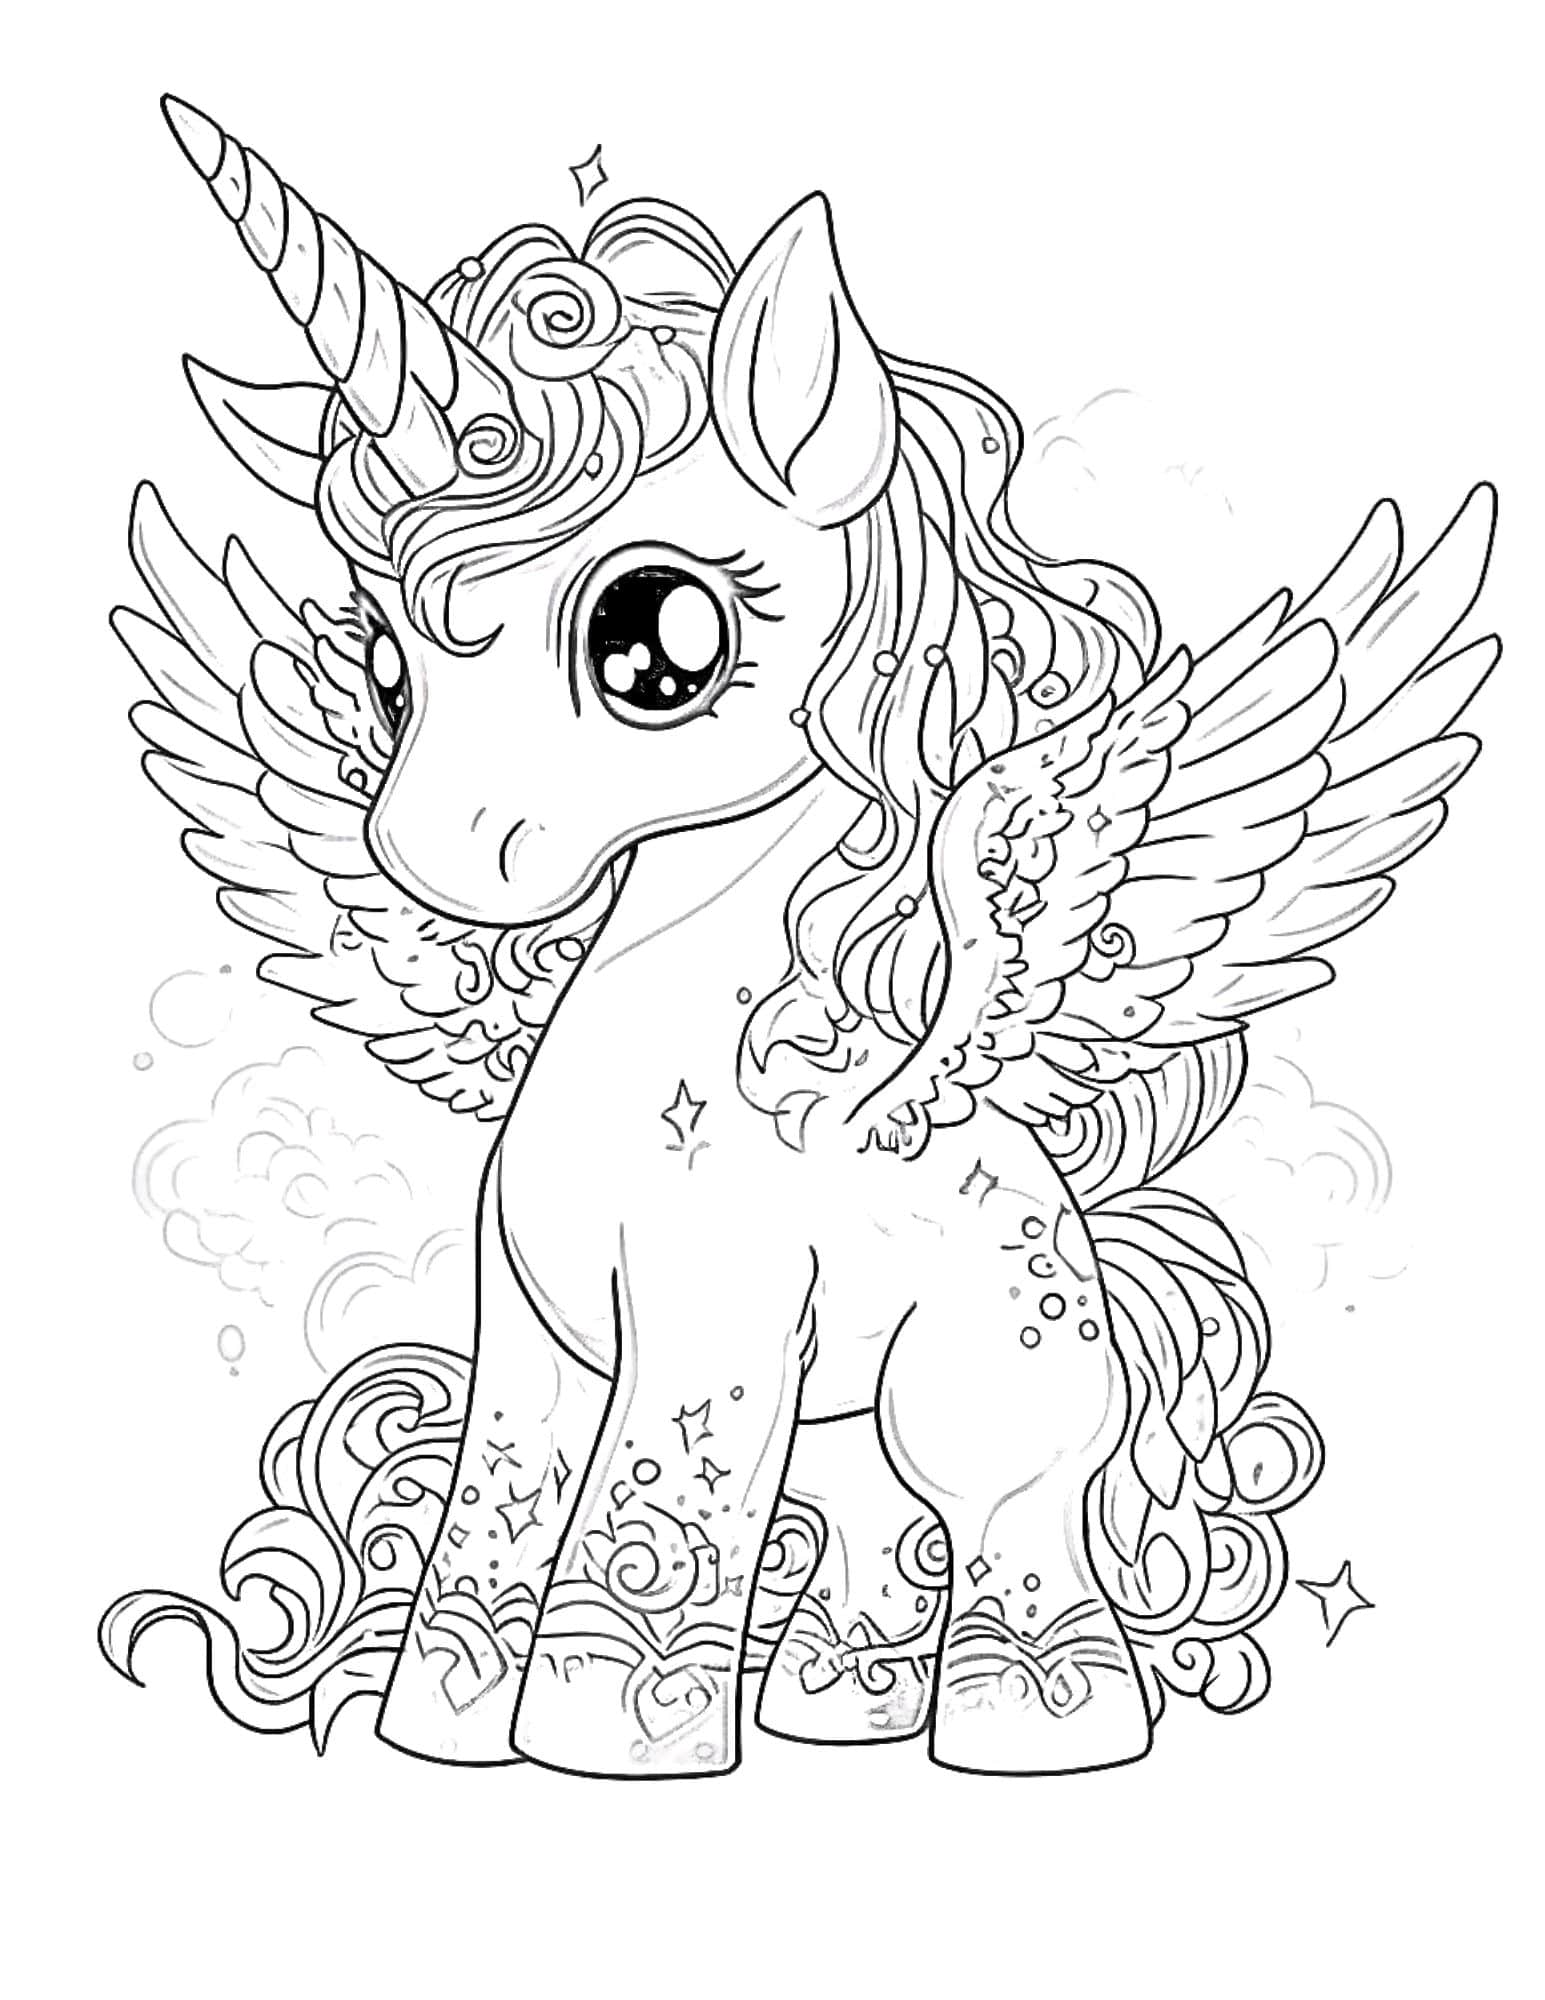 https://www.ourmindfullife.com/wp-content/uploads/2023/08/Cute-unicorn-with-wings-coloring-page-for-kids-original.jpg